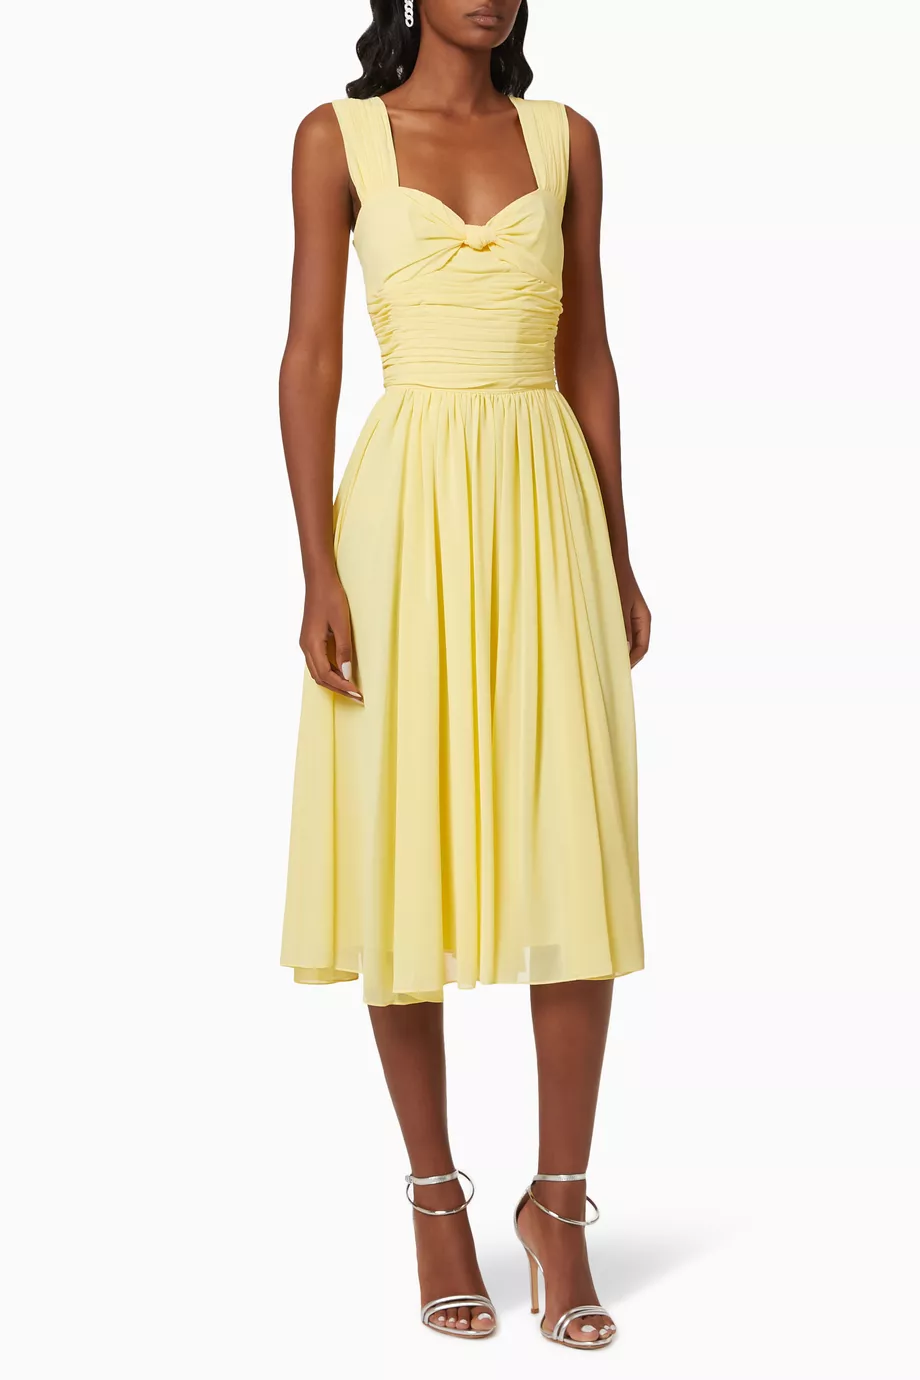 Shop Polo Ralph Lauren Yellow Gathered Cocktail Dress in Crepe for WOMEN |  Ounass UAE